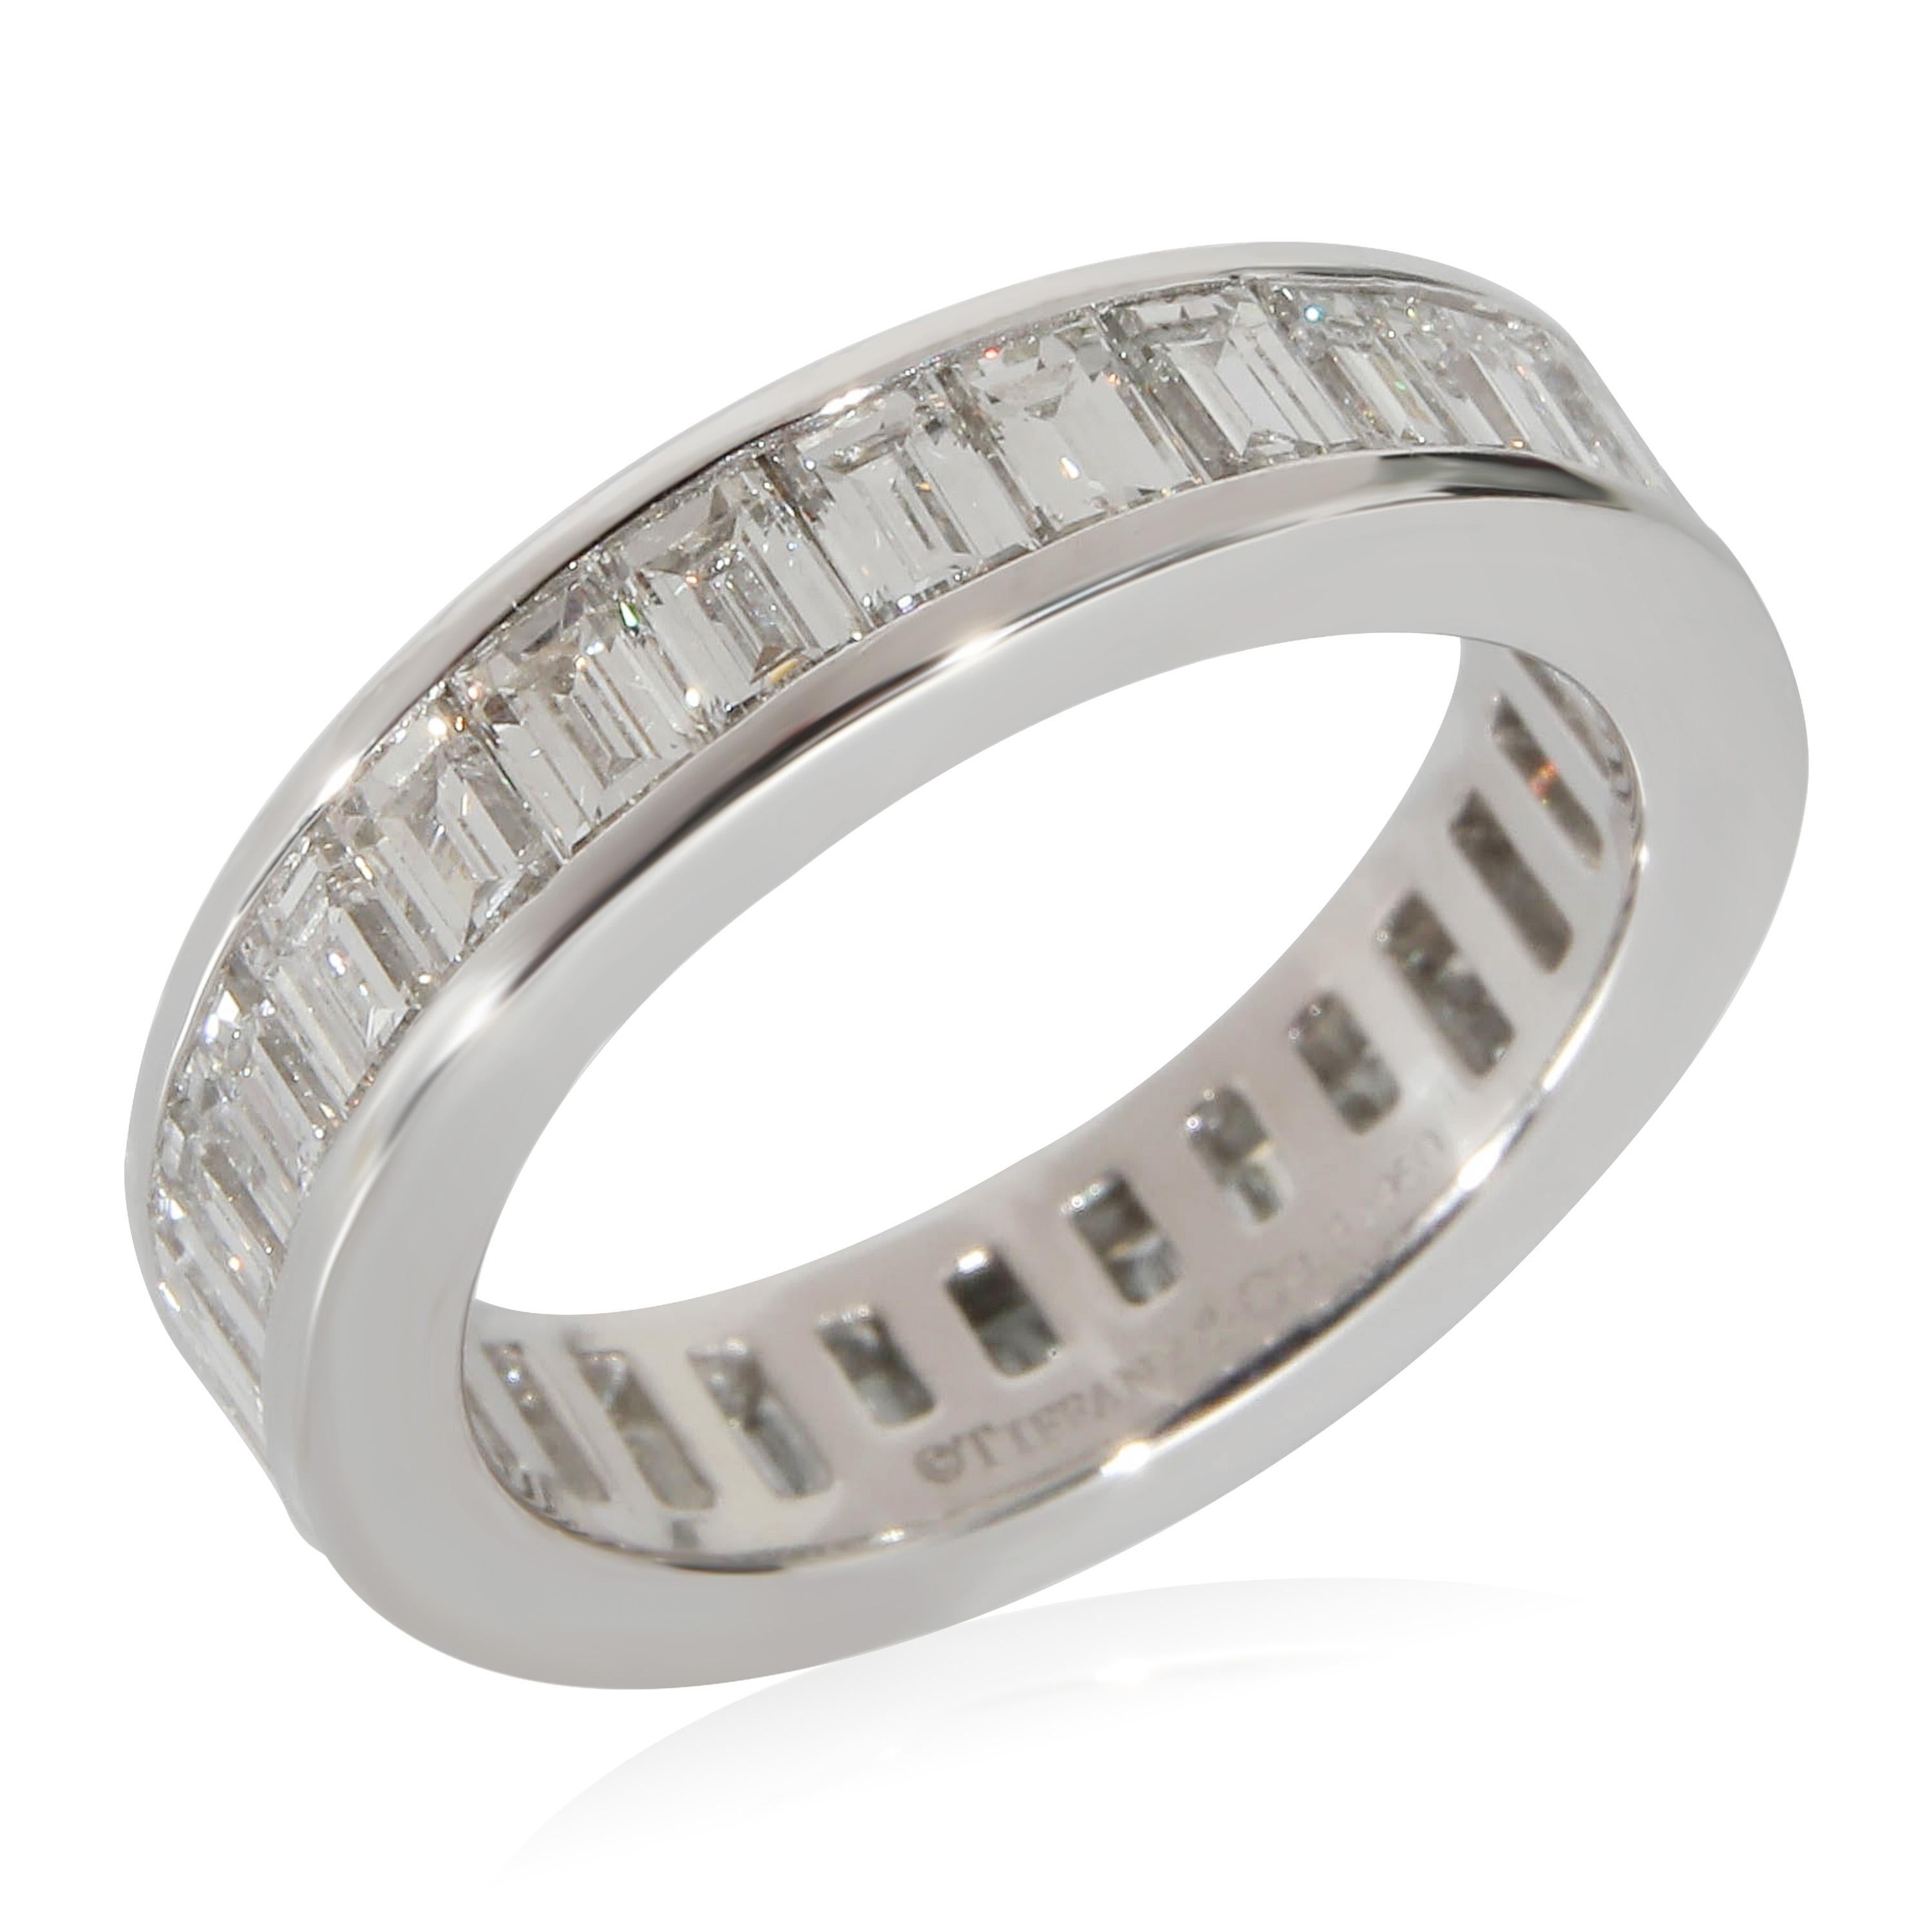 Tiffany & Co. Baguette Diamond Eternity Band In Platinum 2.50 Ctw

PRIMARY DETAILS
SKU: 132565
Listing Title: Tiffany & Co. Baguette Diamond Eternity Band In Platinum 2.50 Ctw
Condition Description: Retails for 15500 USD. In excellent condition and